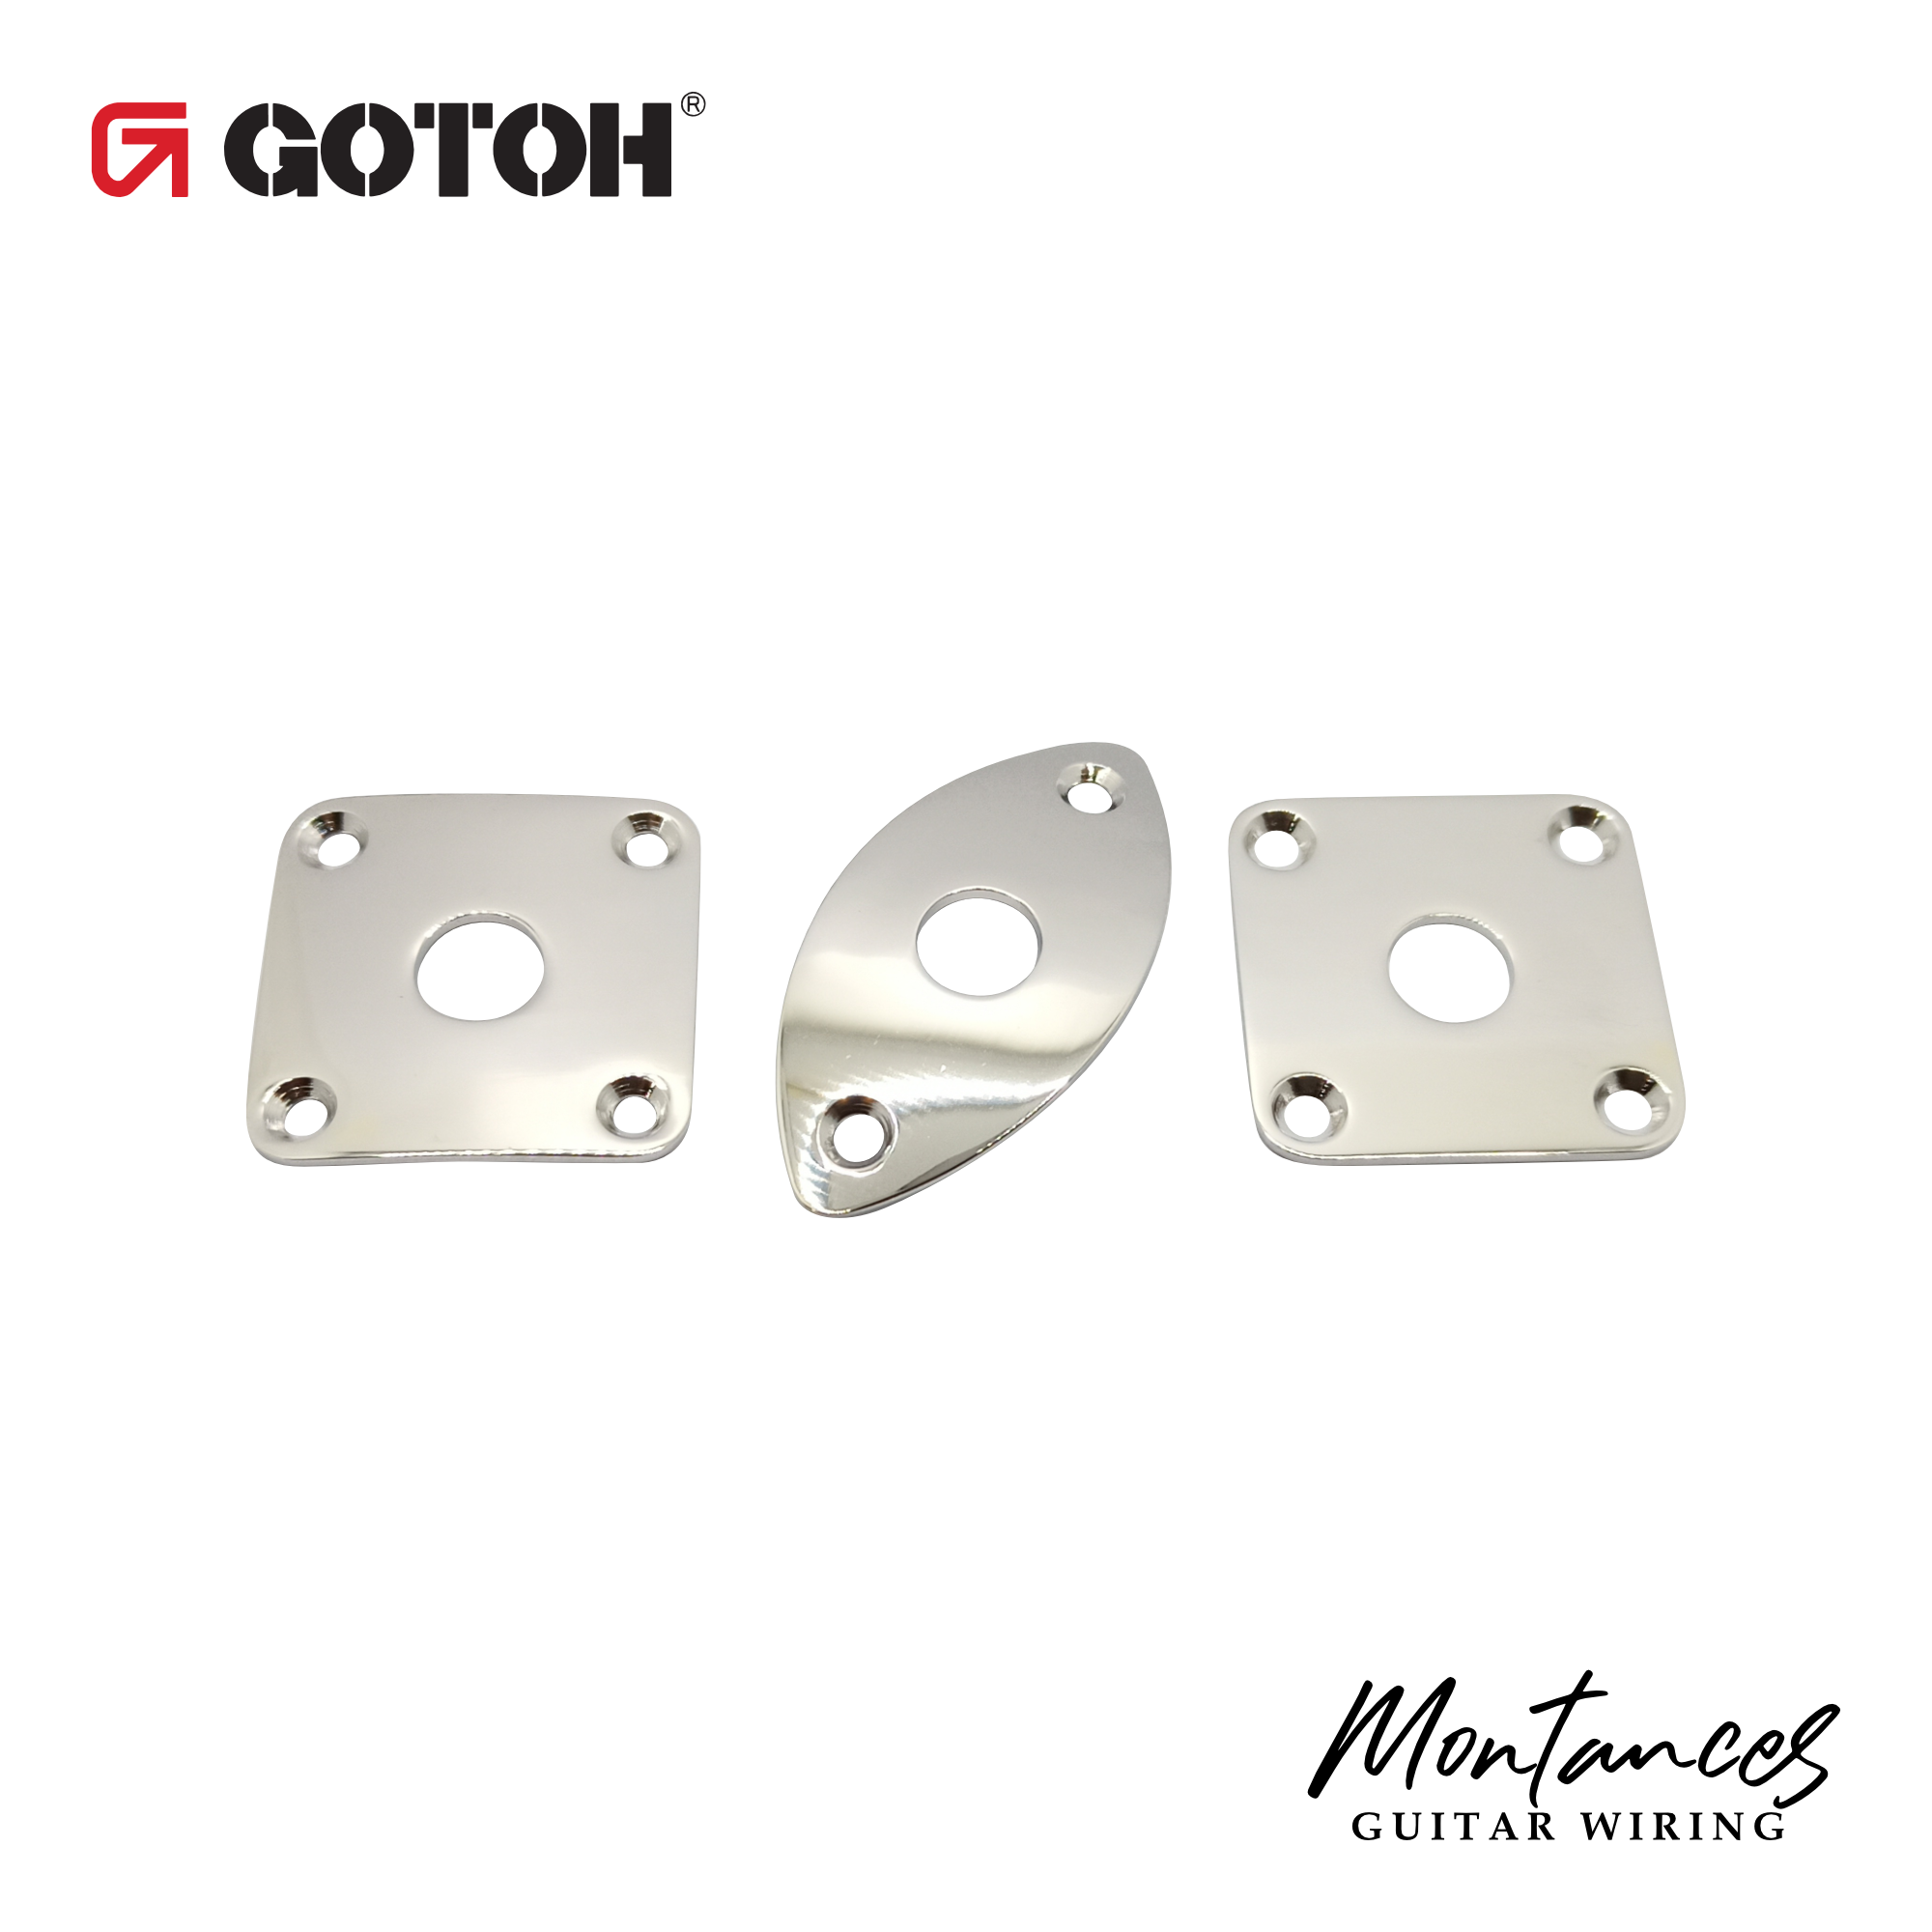 Gotoh® Jack Plate for guitar and bass, Stainless steel